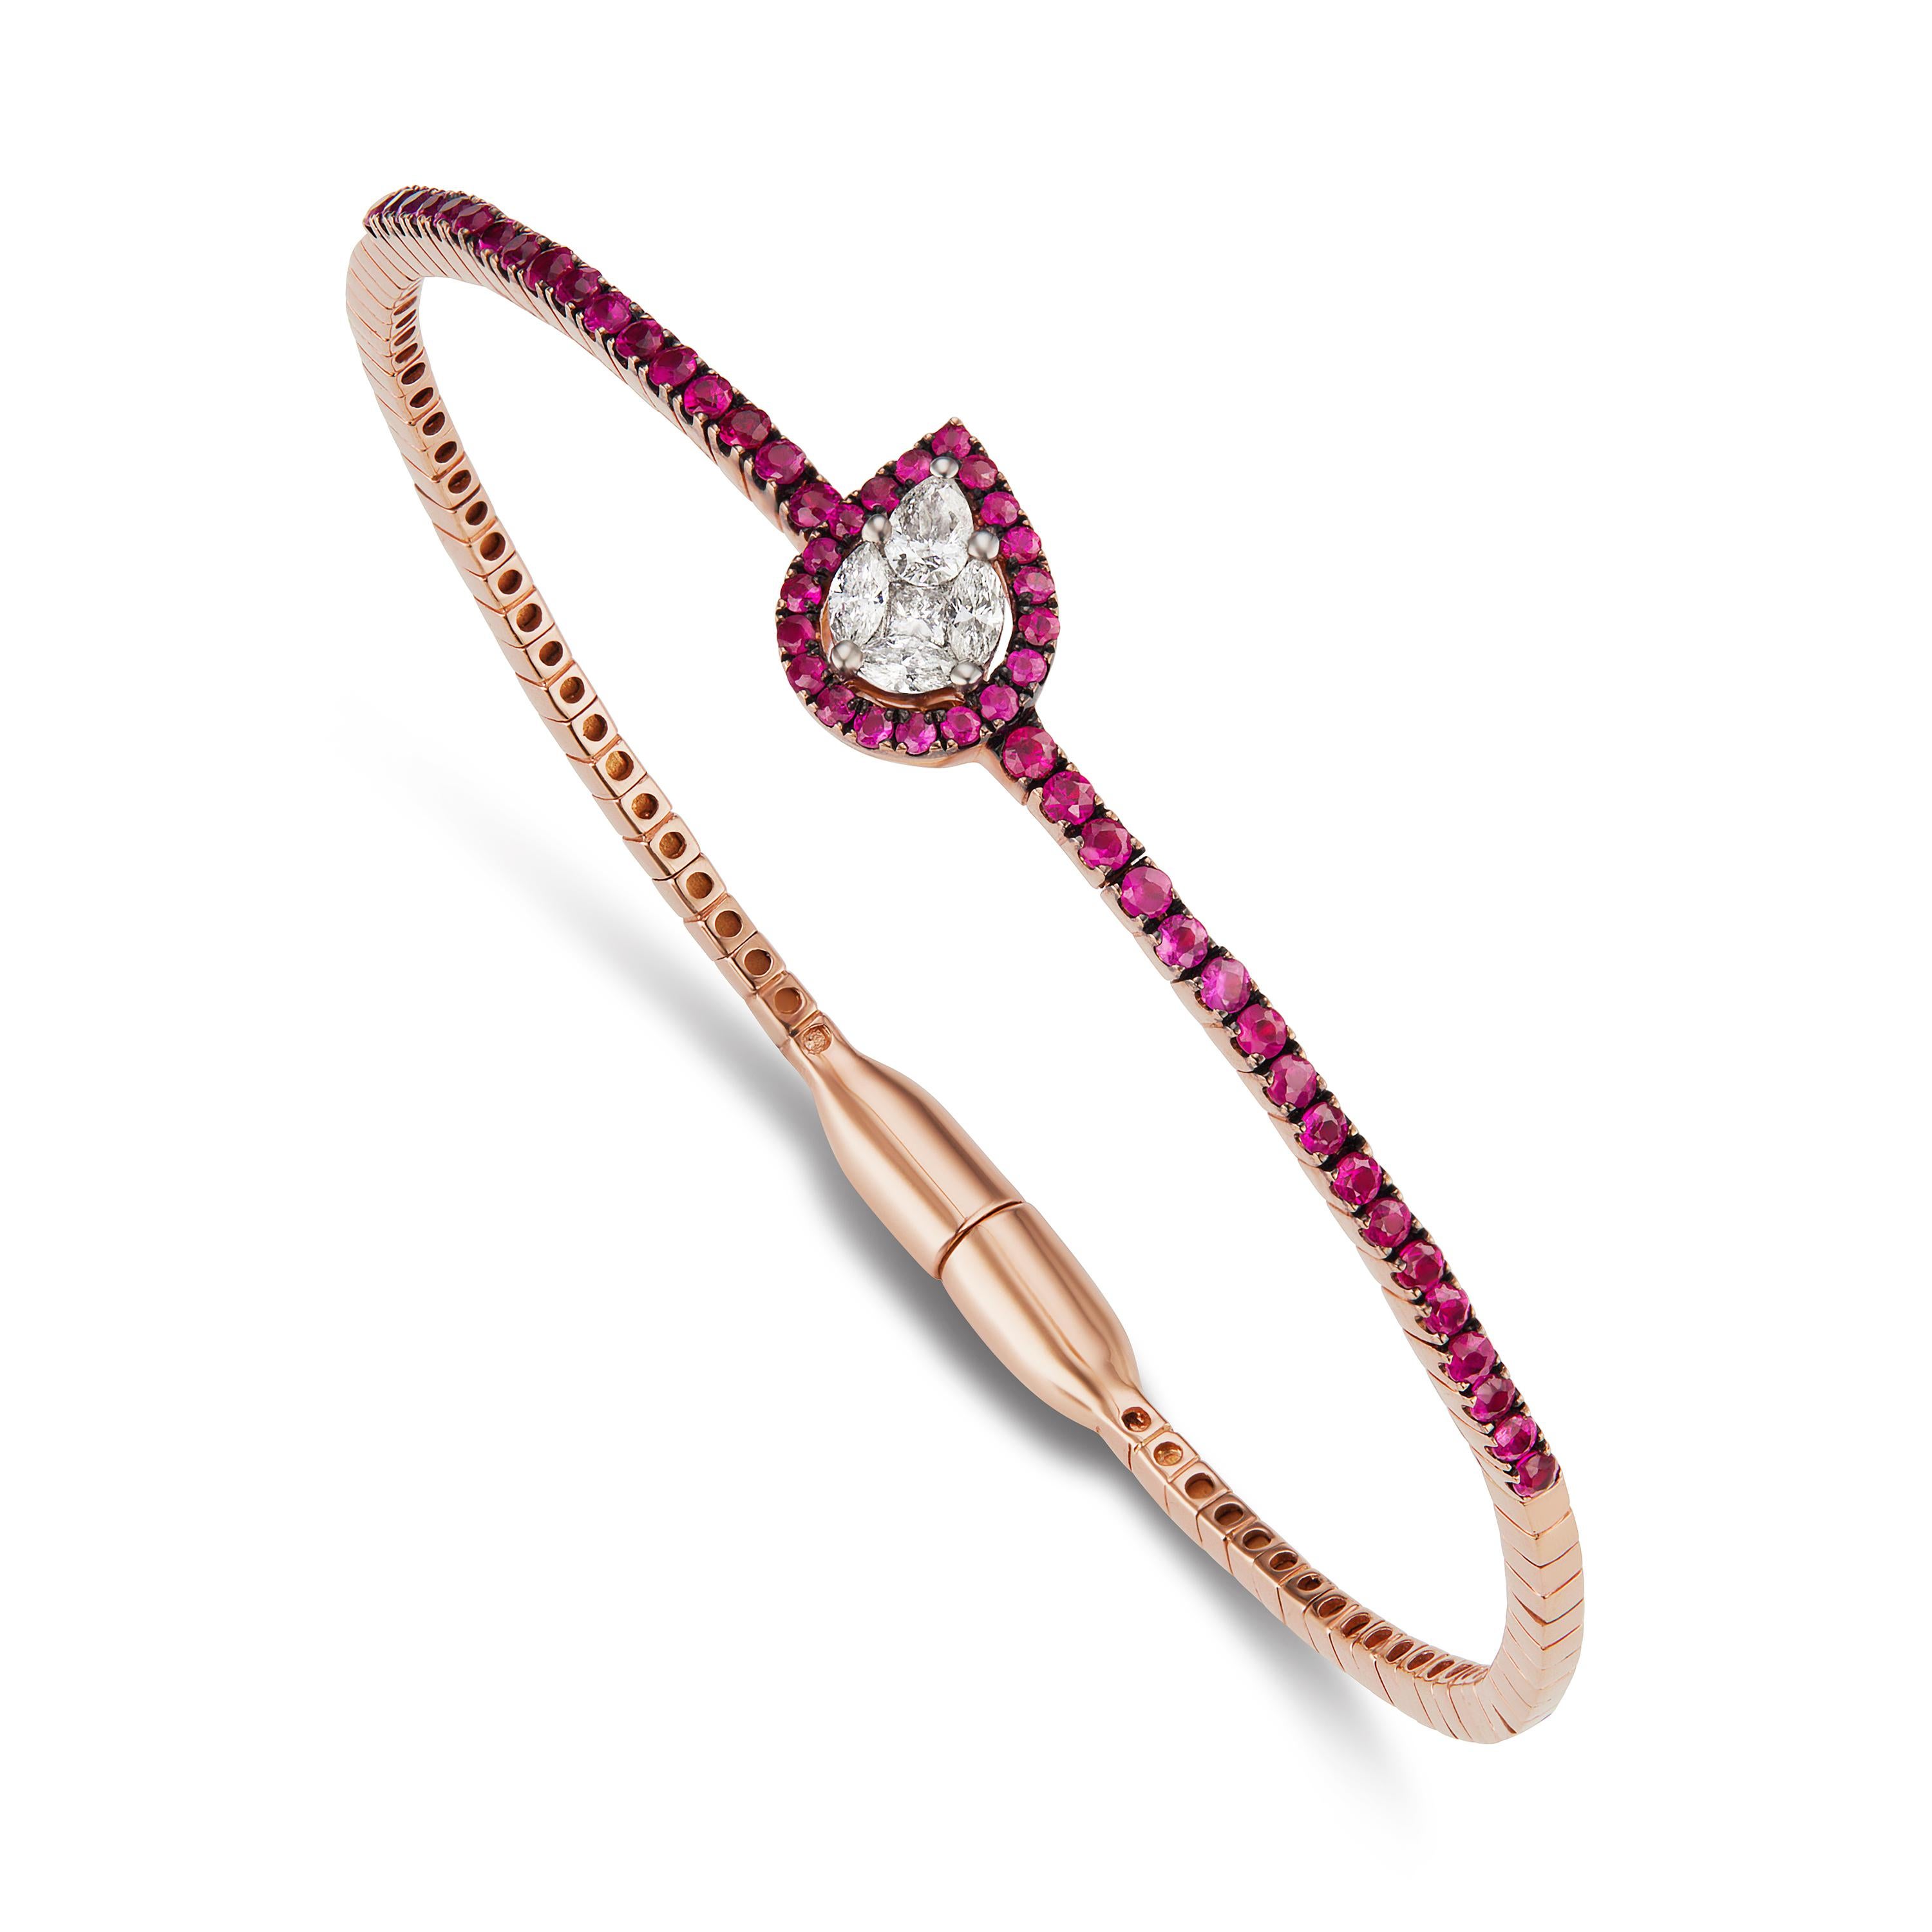 Classically styled with a shimmering red in white heart, this Gemistry bangle in 18K rose gold is featured with diamonds and rubies. This bangle is made with 5 marquise and pear diamonds and 53 round rubies. It comes with a magnetic lock.
Please